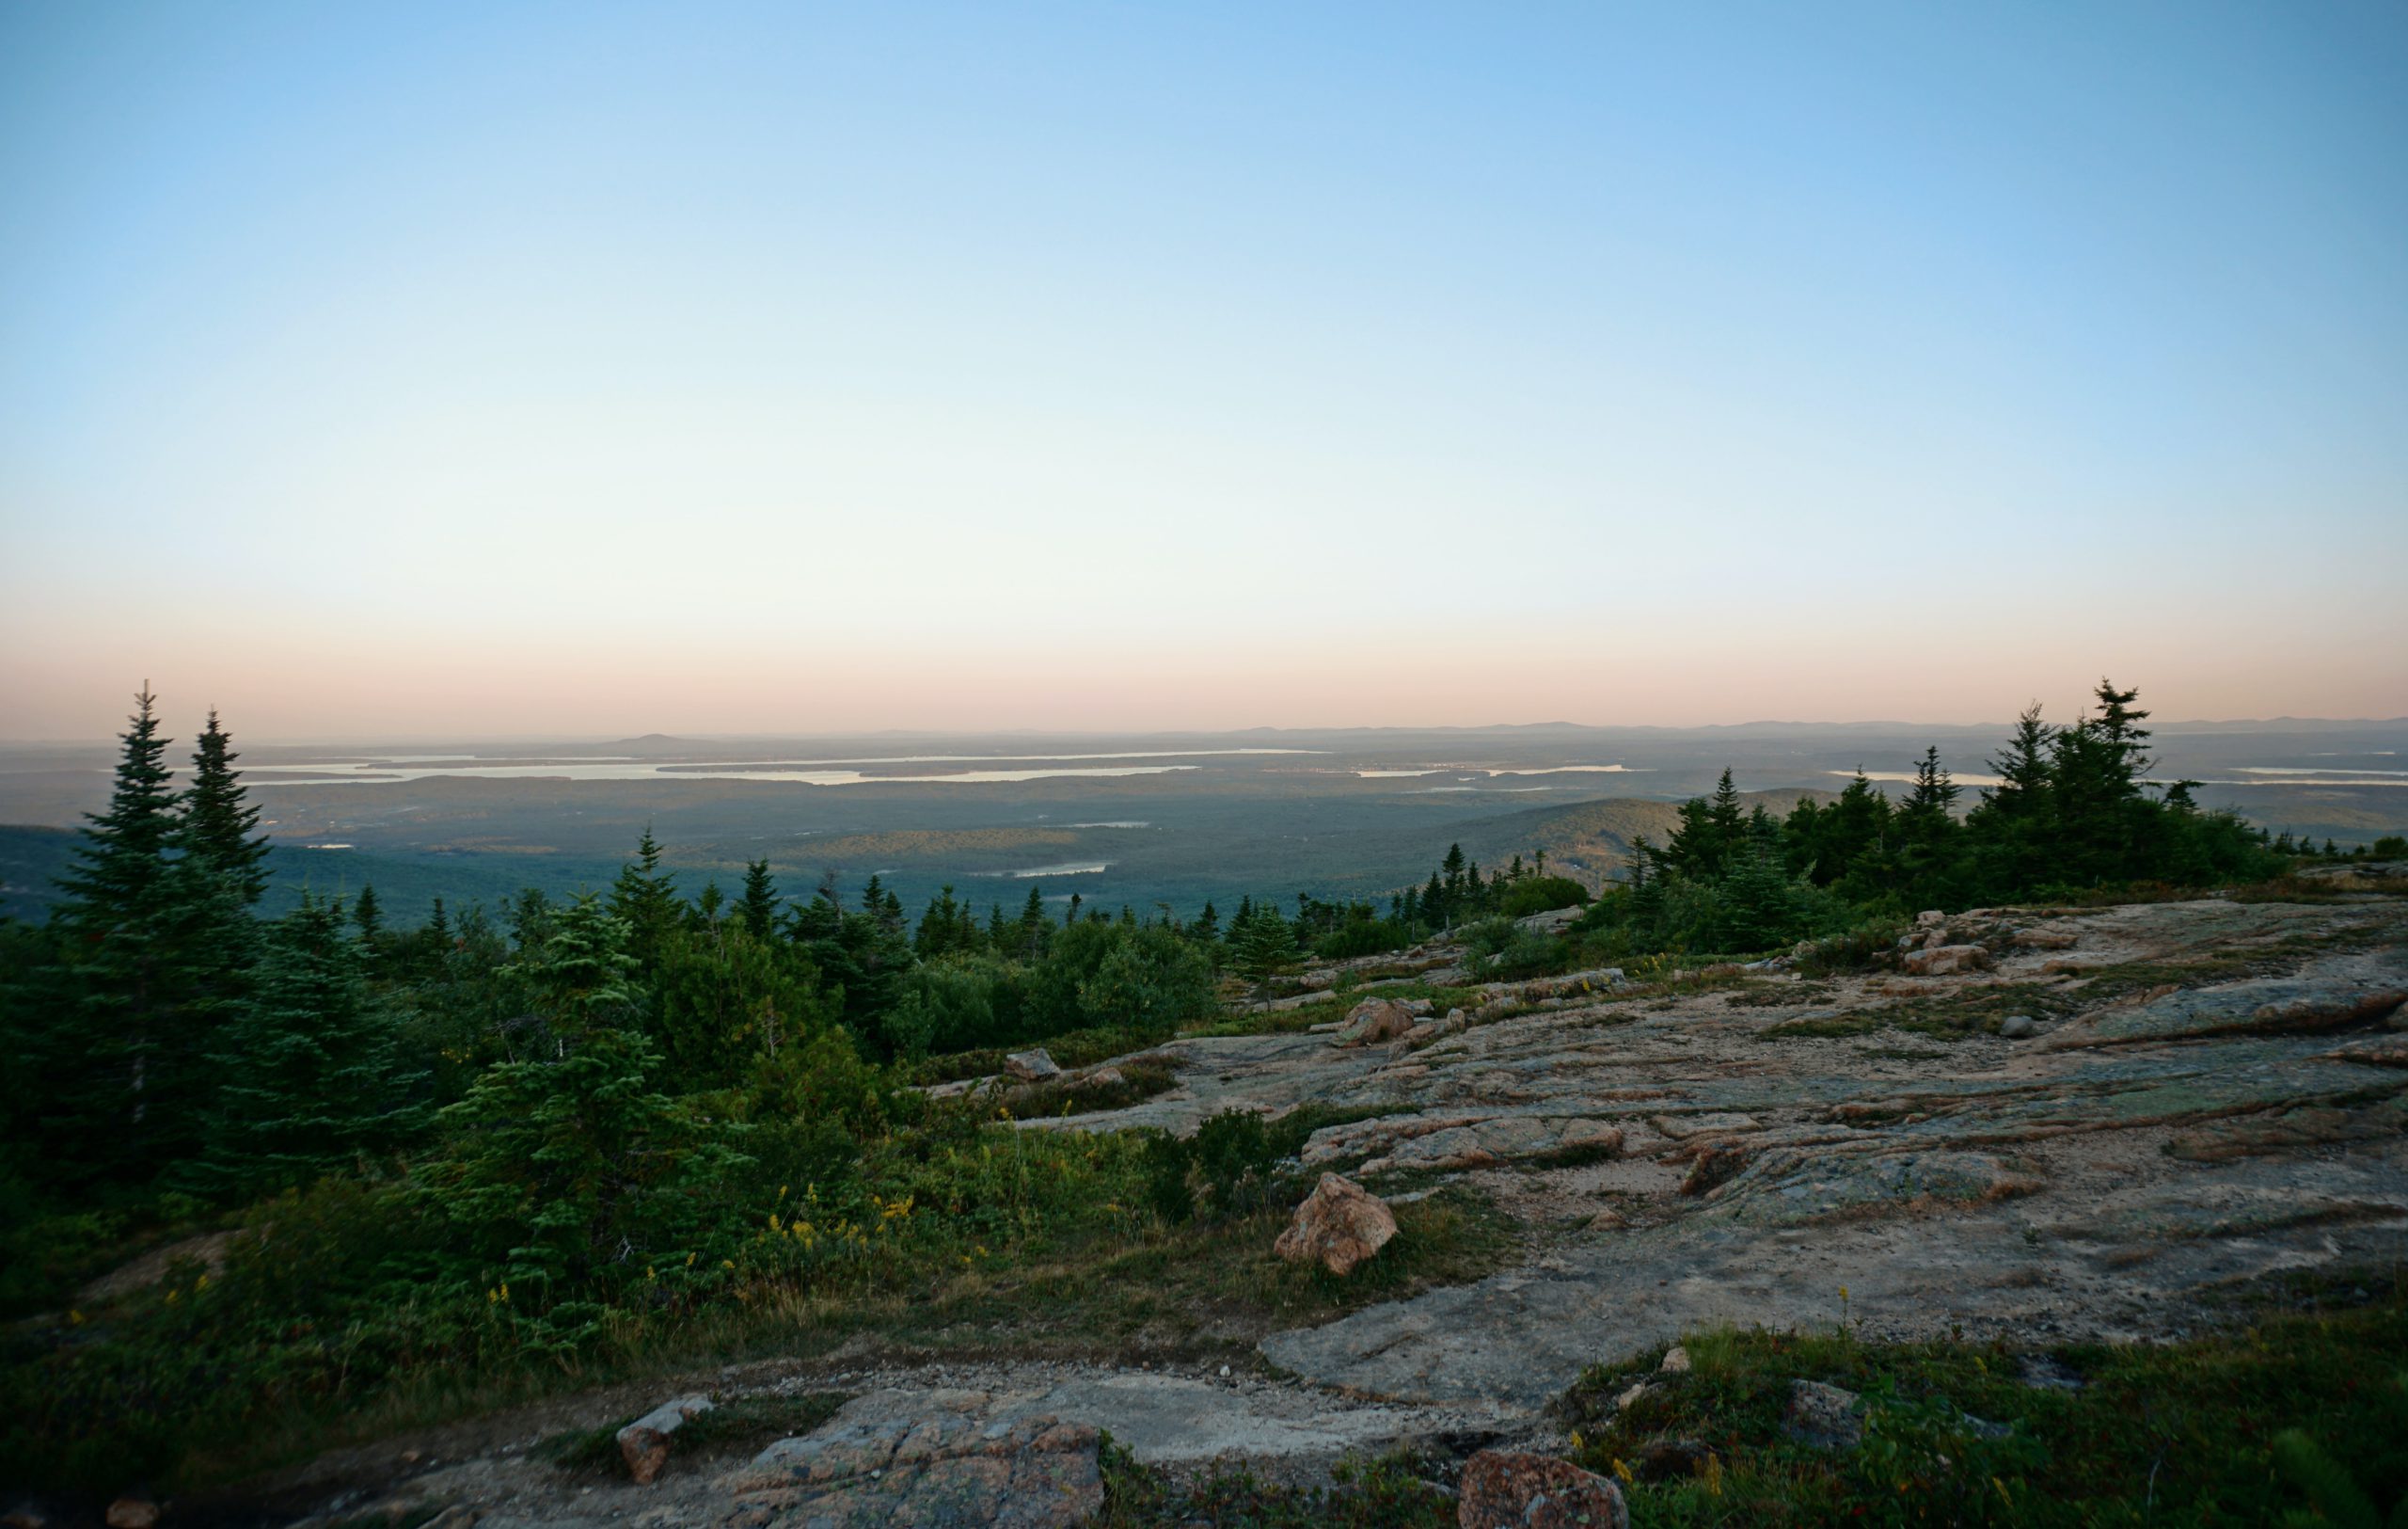 The beautiful view of Acadia National Park with clear skies and its forest surrounding.